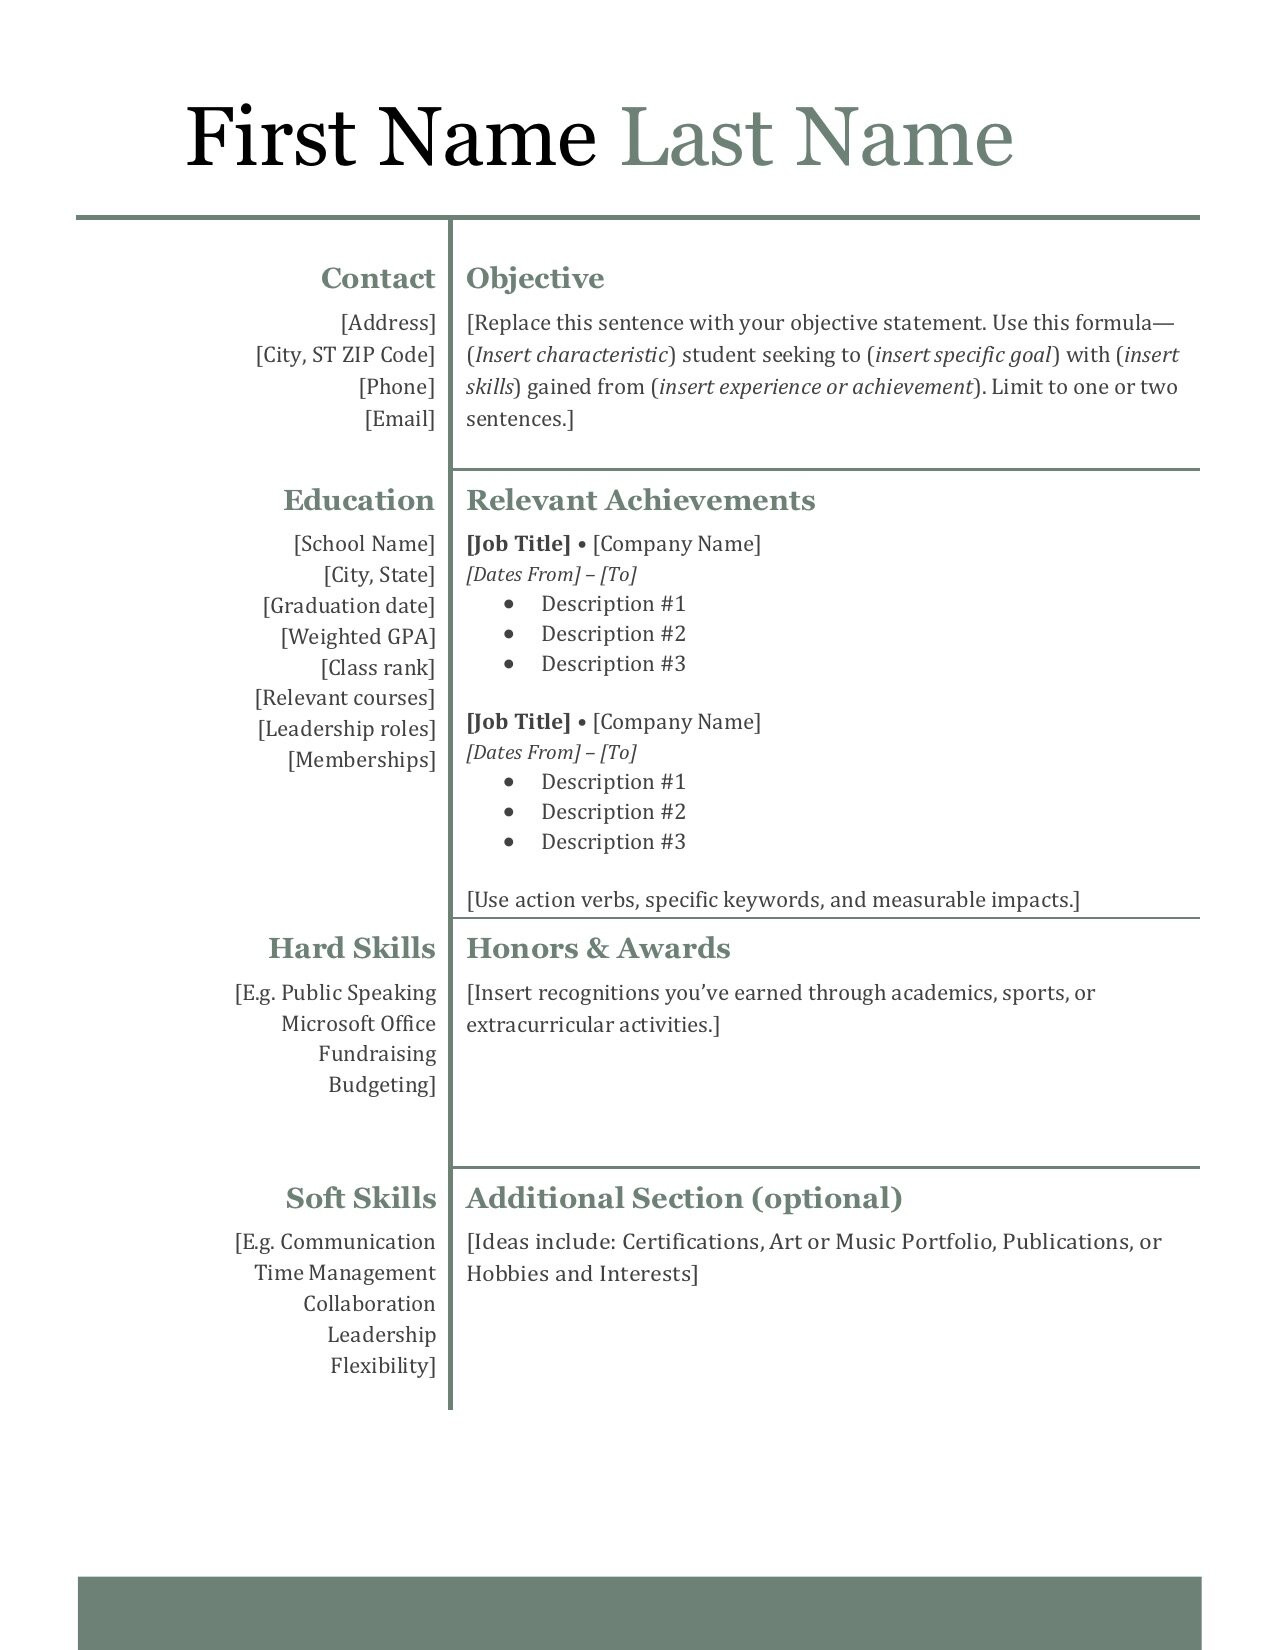 Sample Resume for High School Student Looking for A Job How to Write An Impressive High School Resume â Shemmassian …